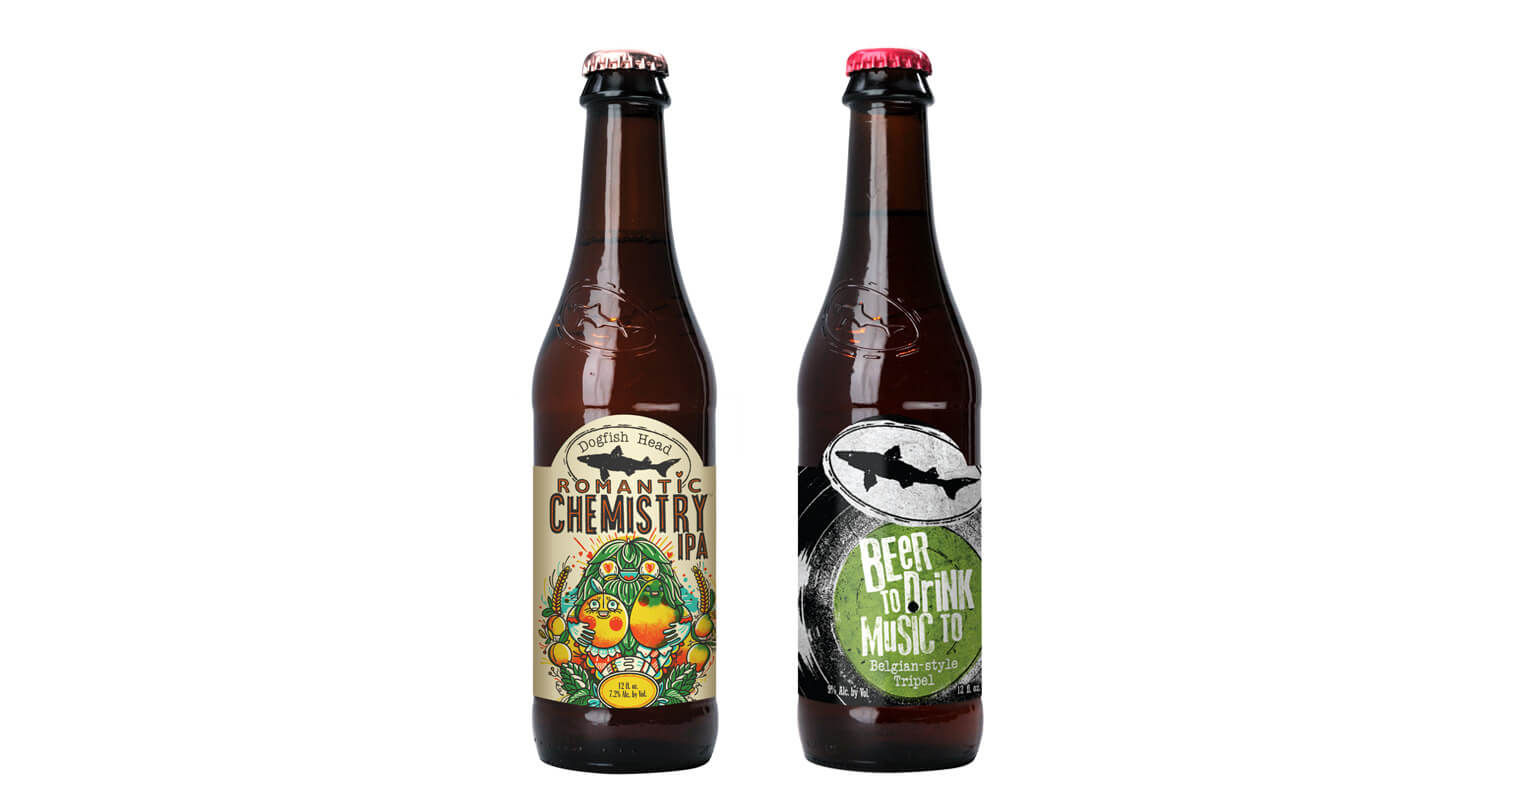 Dogfish Head Releases Two Limited Edition Beers for Spring, beer news, featured iamge